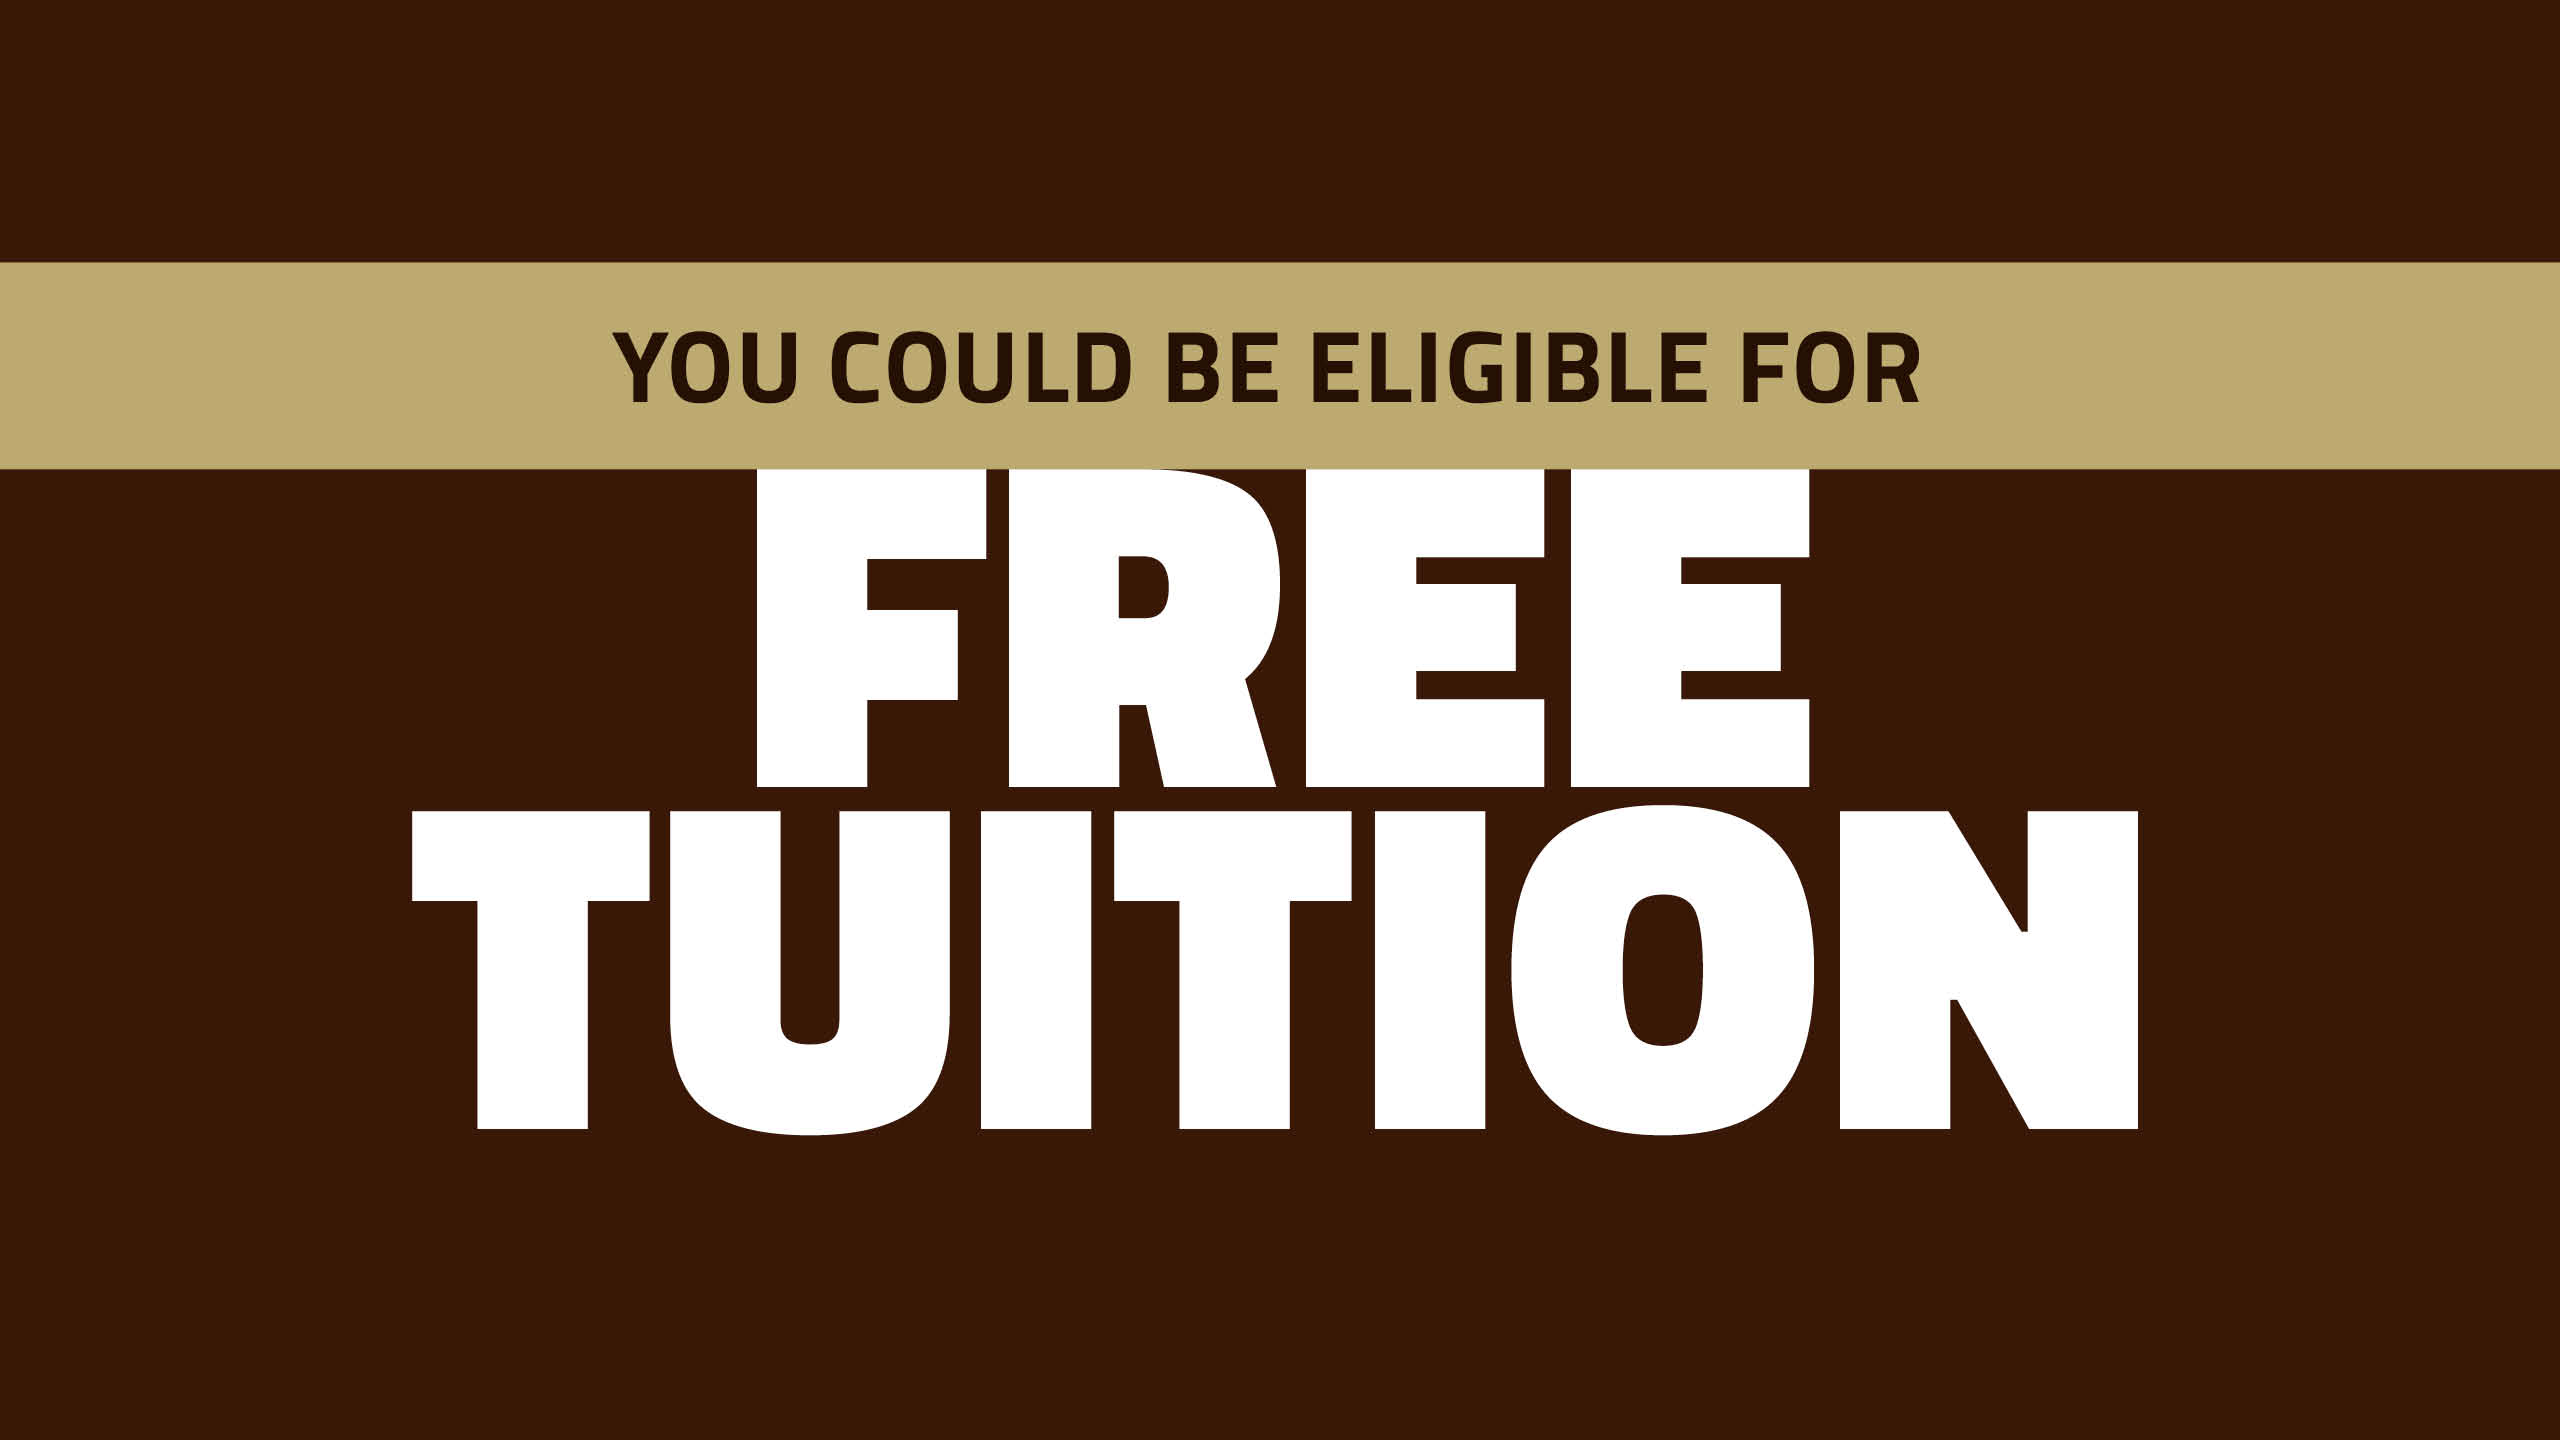 You could be eligible for free tuition.